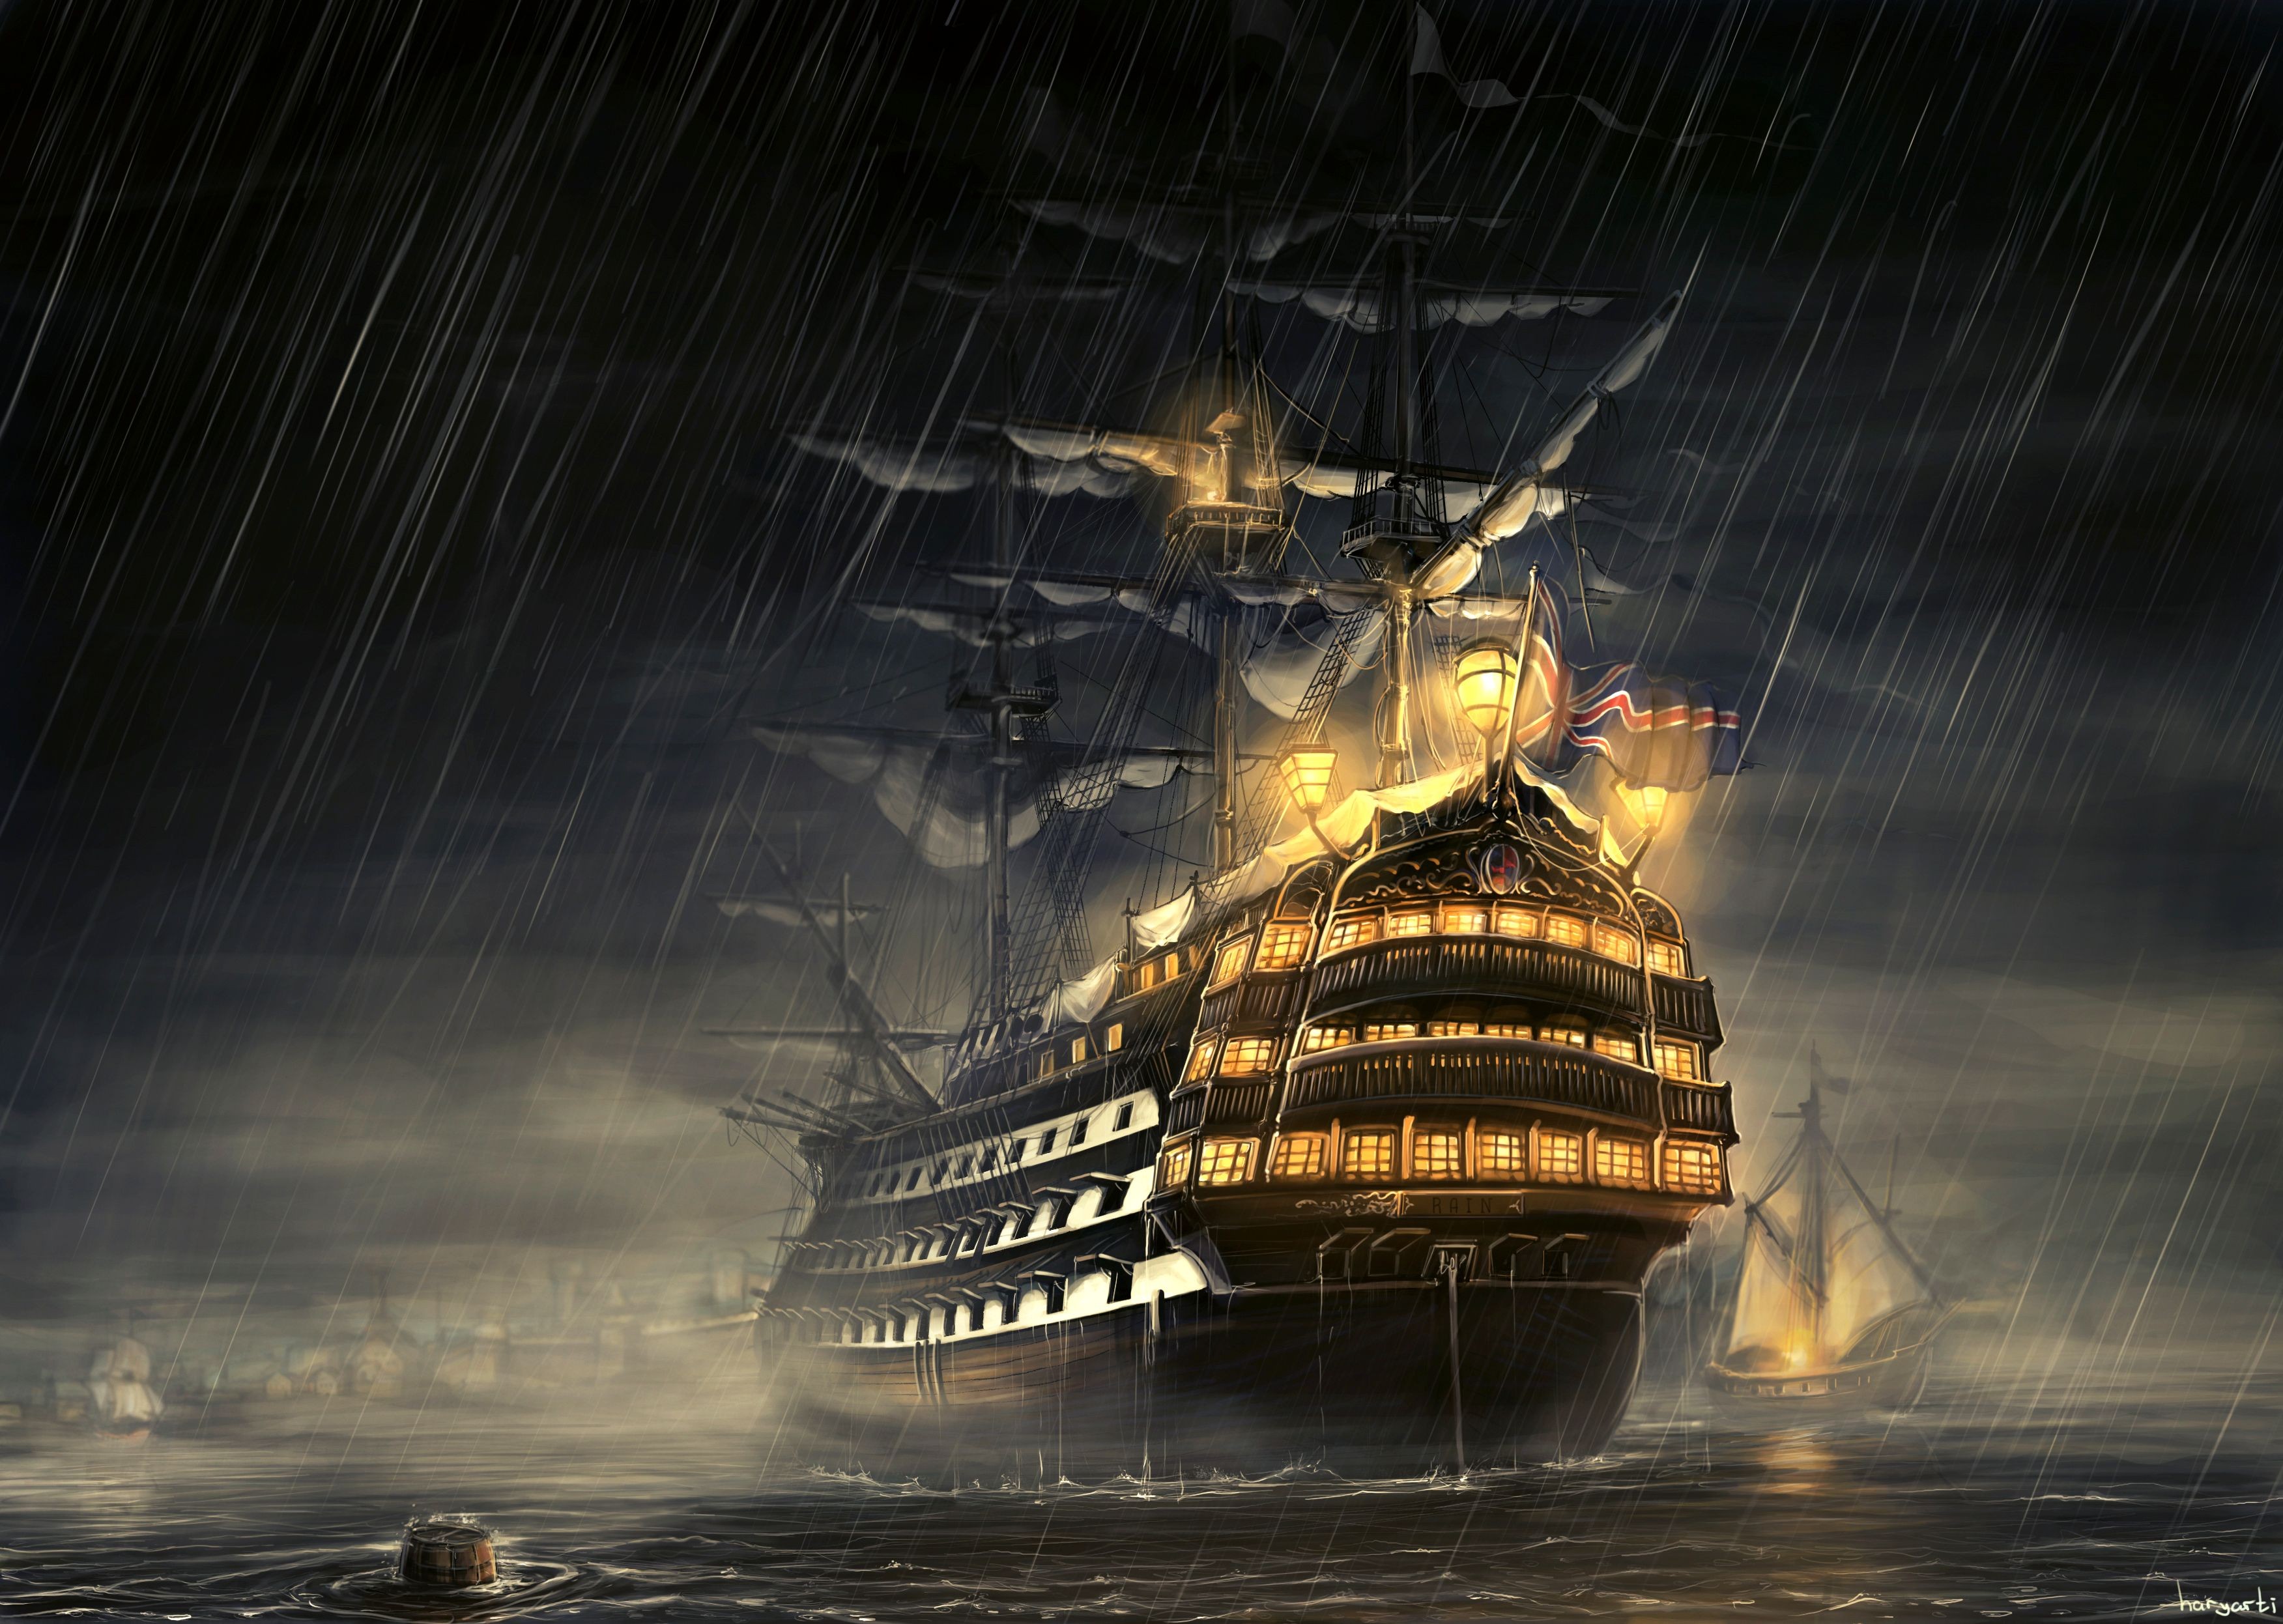 Ship Wallpaper Images in HD Available Here For Download 3504x2493